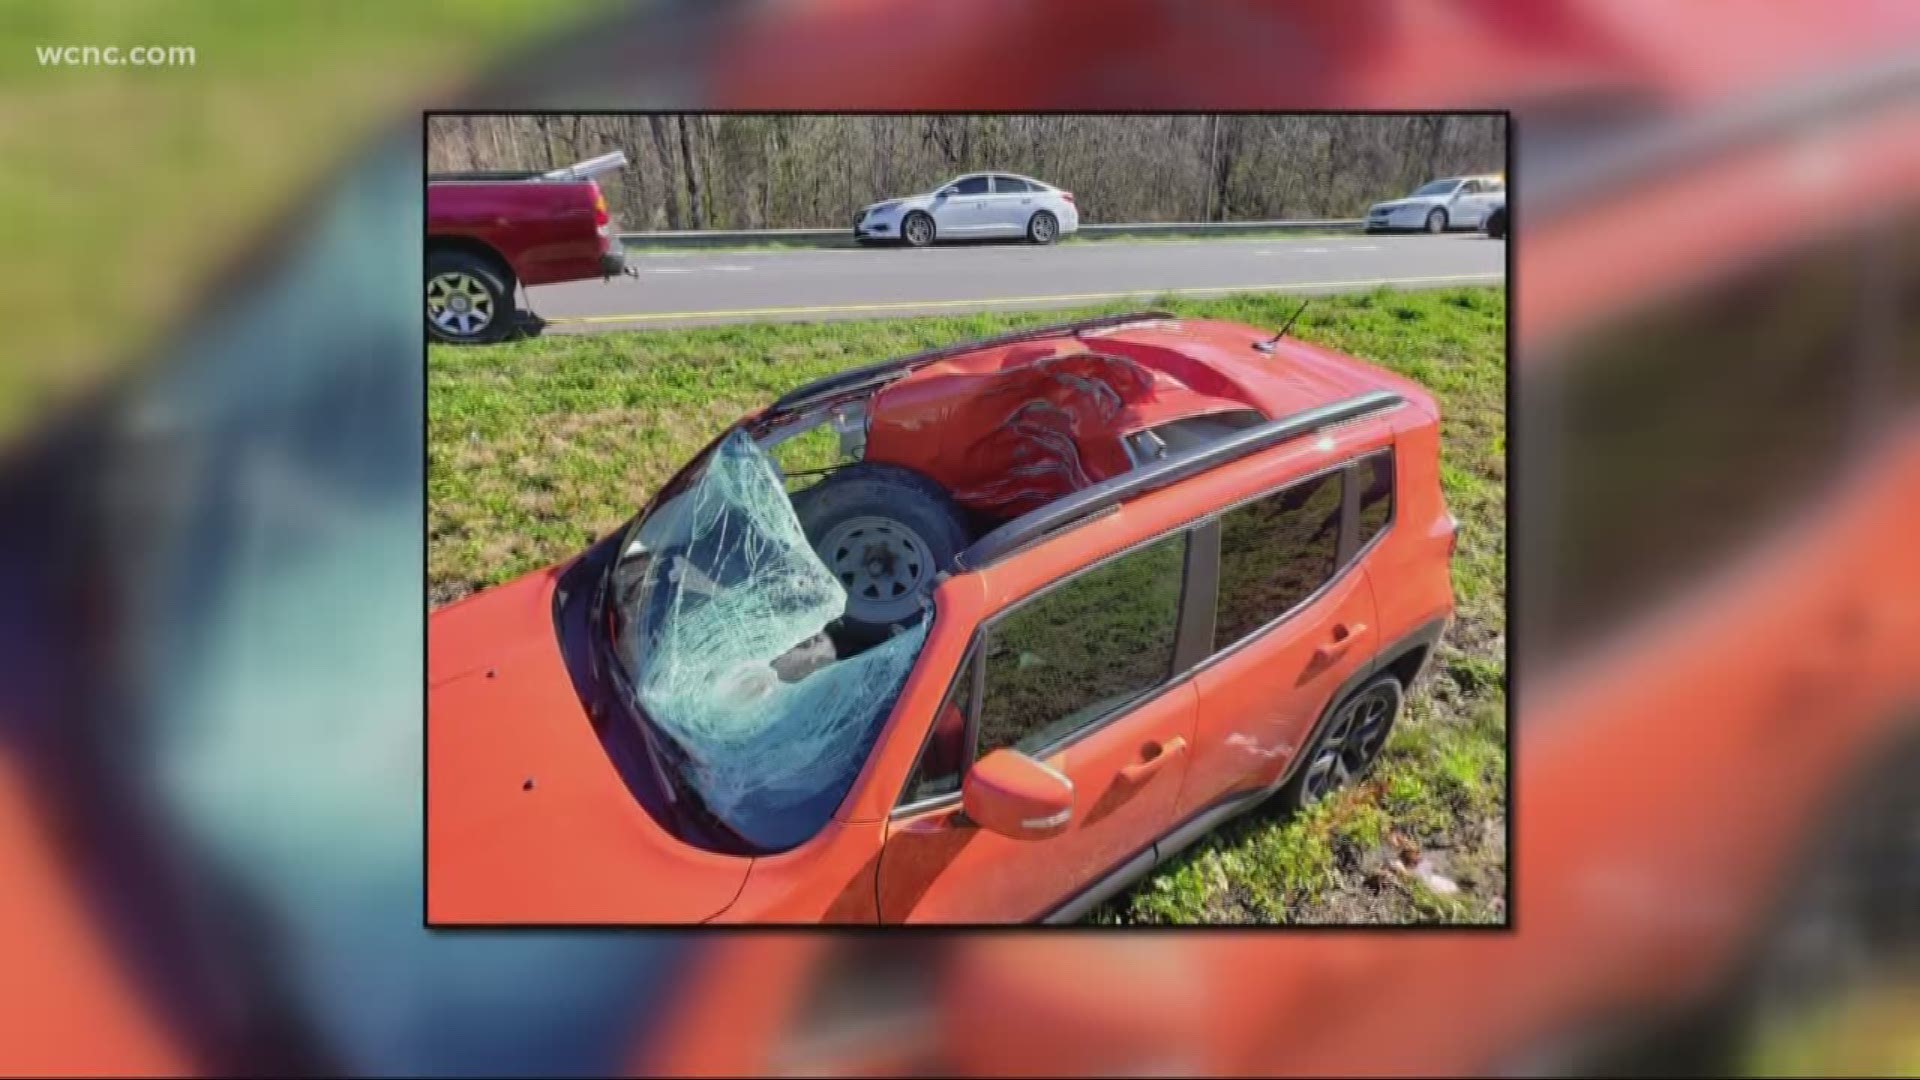 A truck was hauling a large boat when a wheel came loose and rolled across the median. That wheel struck another vehicle, smashing the windshield.